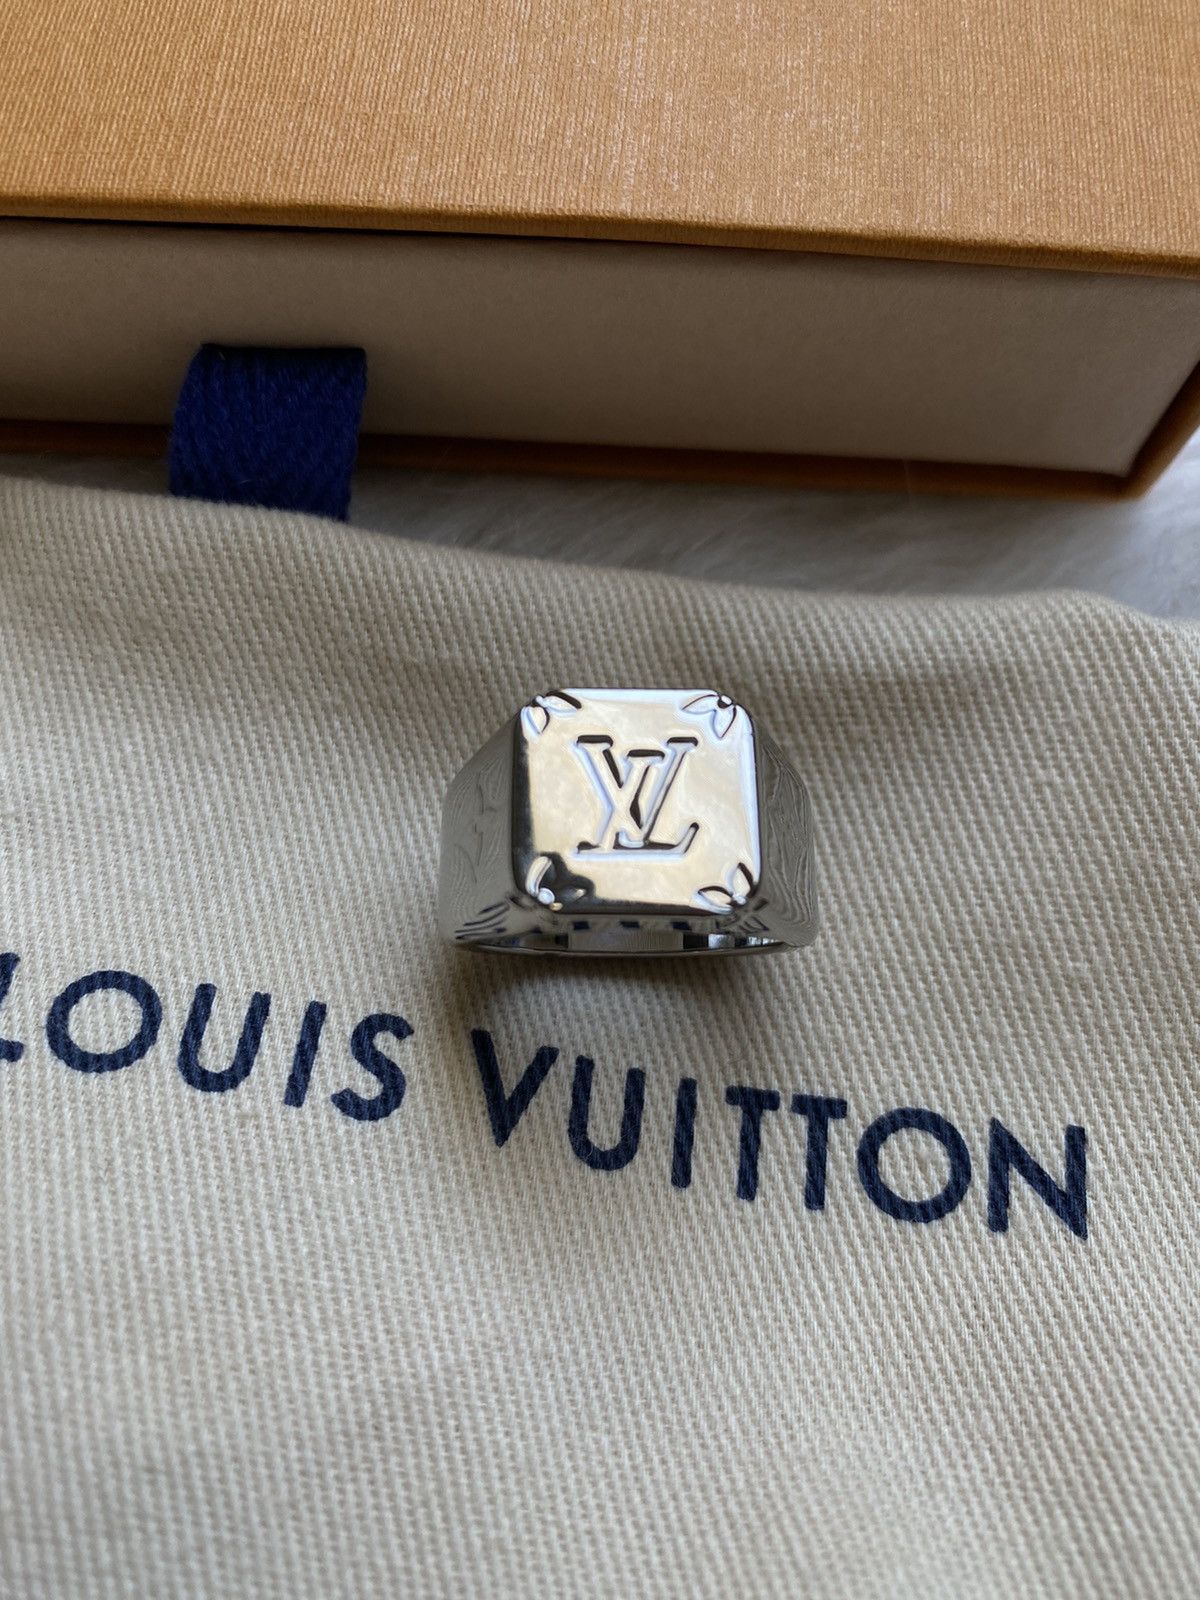 LOUIS VUITTON Signet ring M bague M62487｜Product Code：2100300991713｜BRAND  OFF Online Store